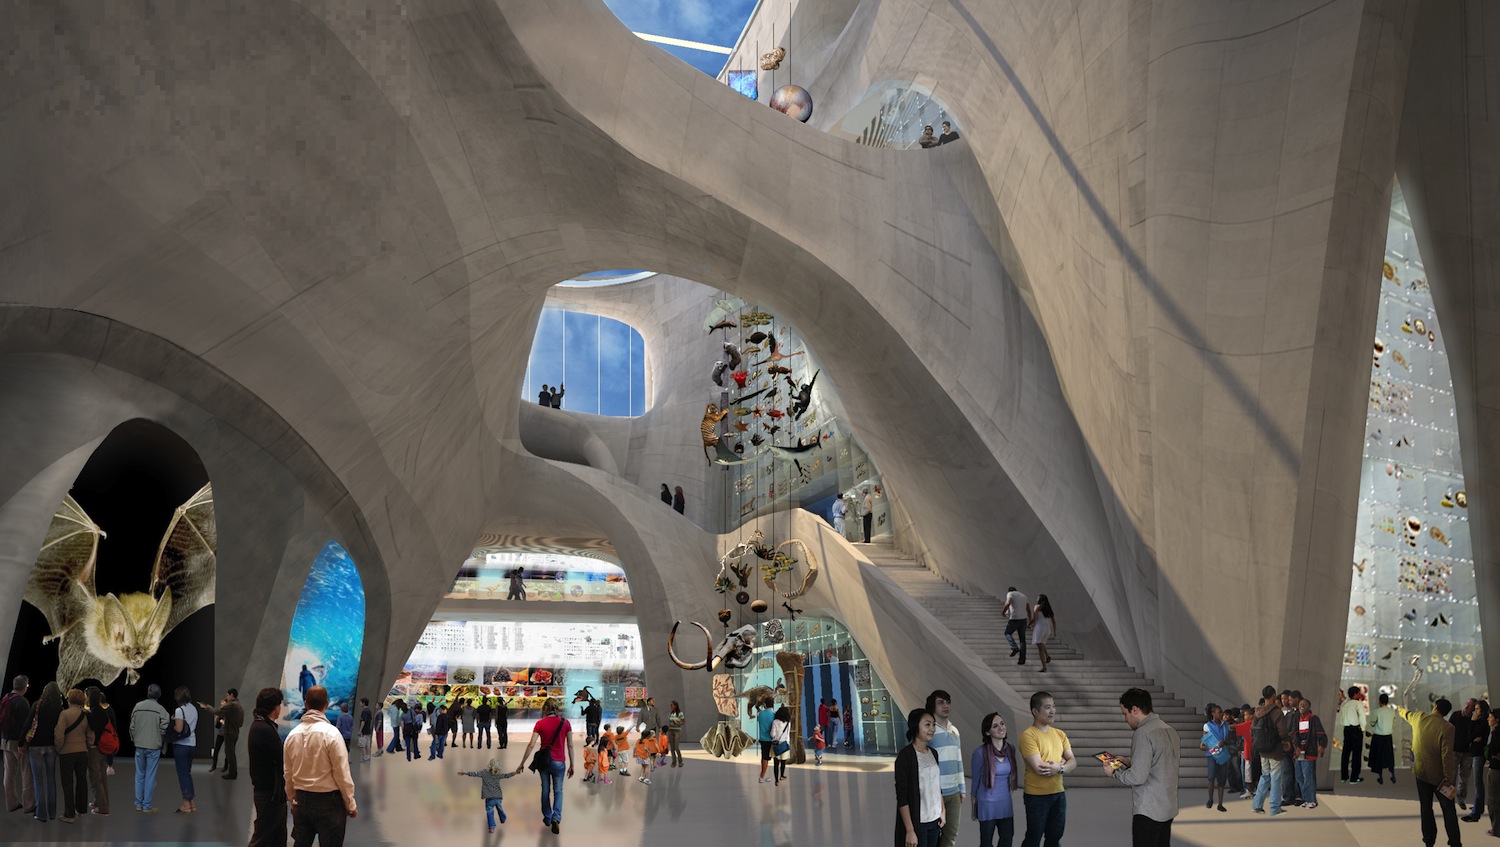 Studio Gang designs American Museum of Natural History's new science center 